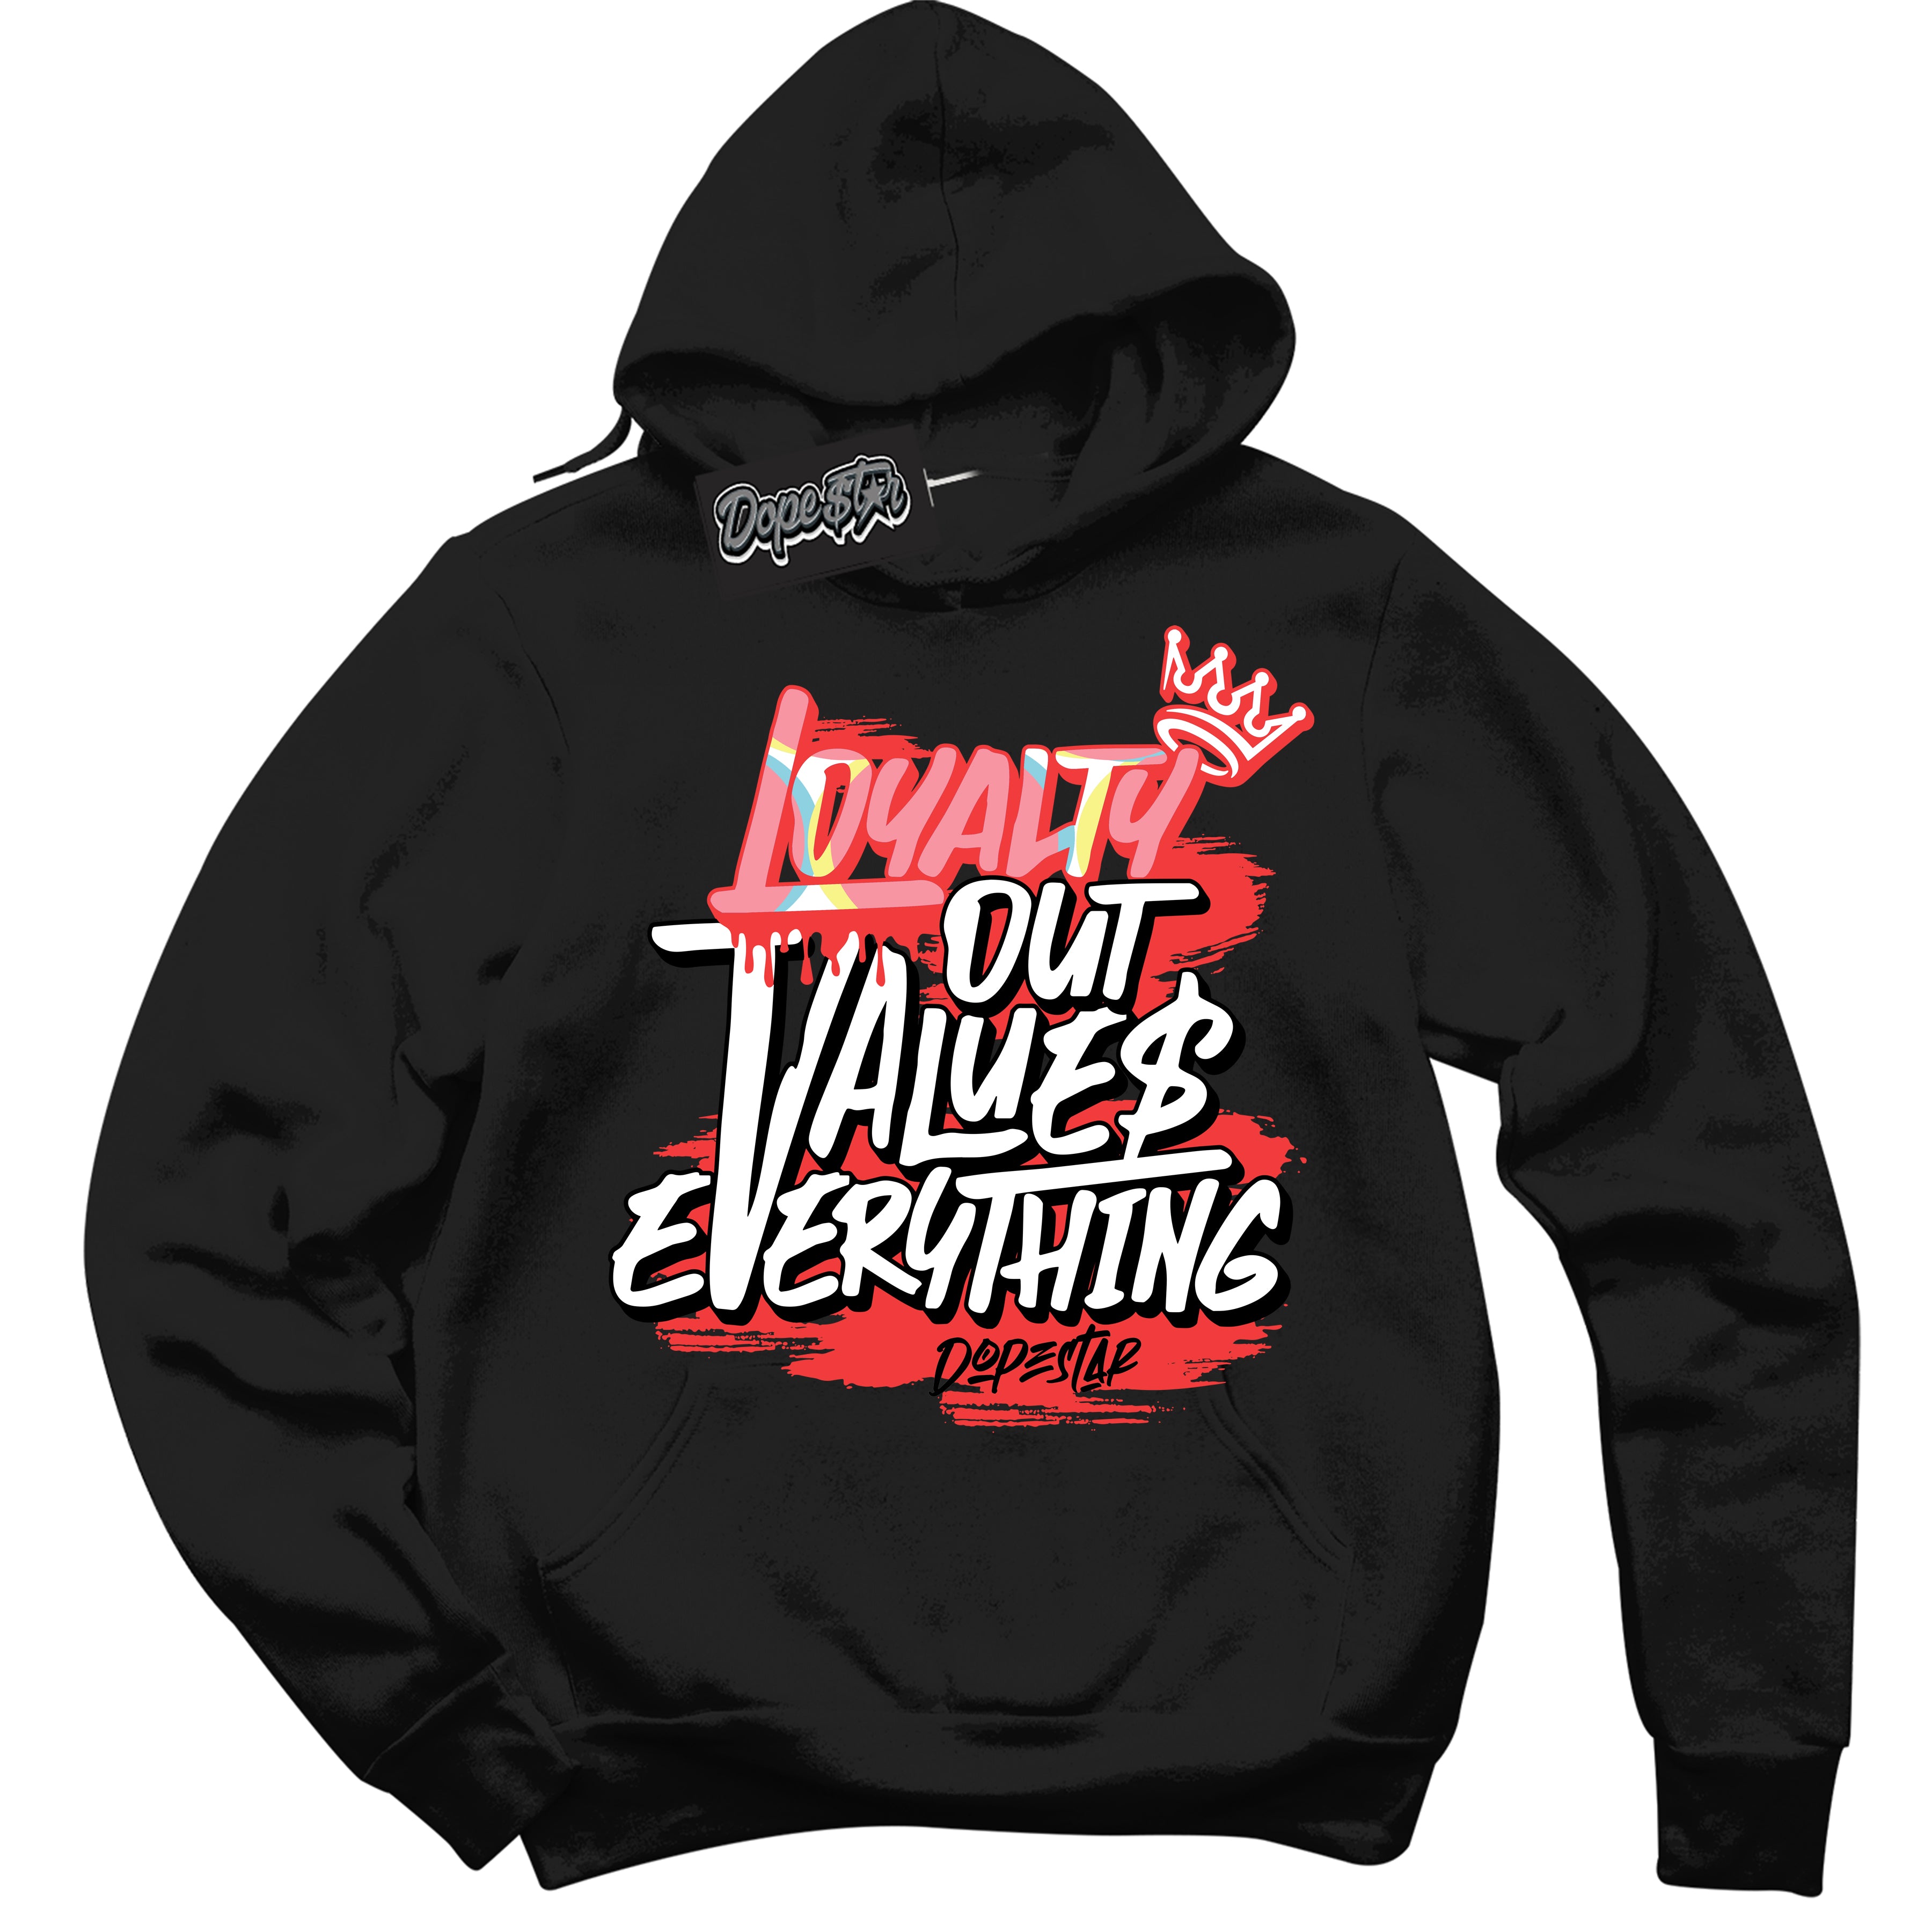 Cool Black Graphic DopeStar Hoodie with “ Loyalty Out Values Everything “ print, that perfectly matches Spider-Verse 1s sneakers